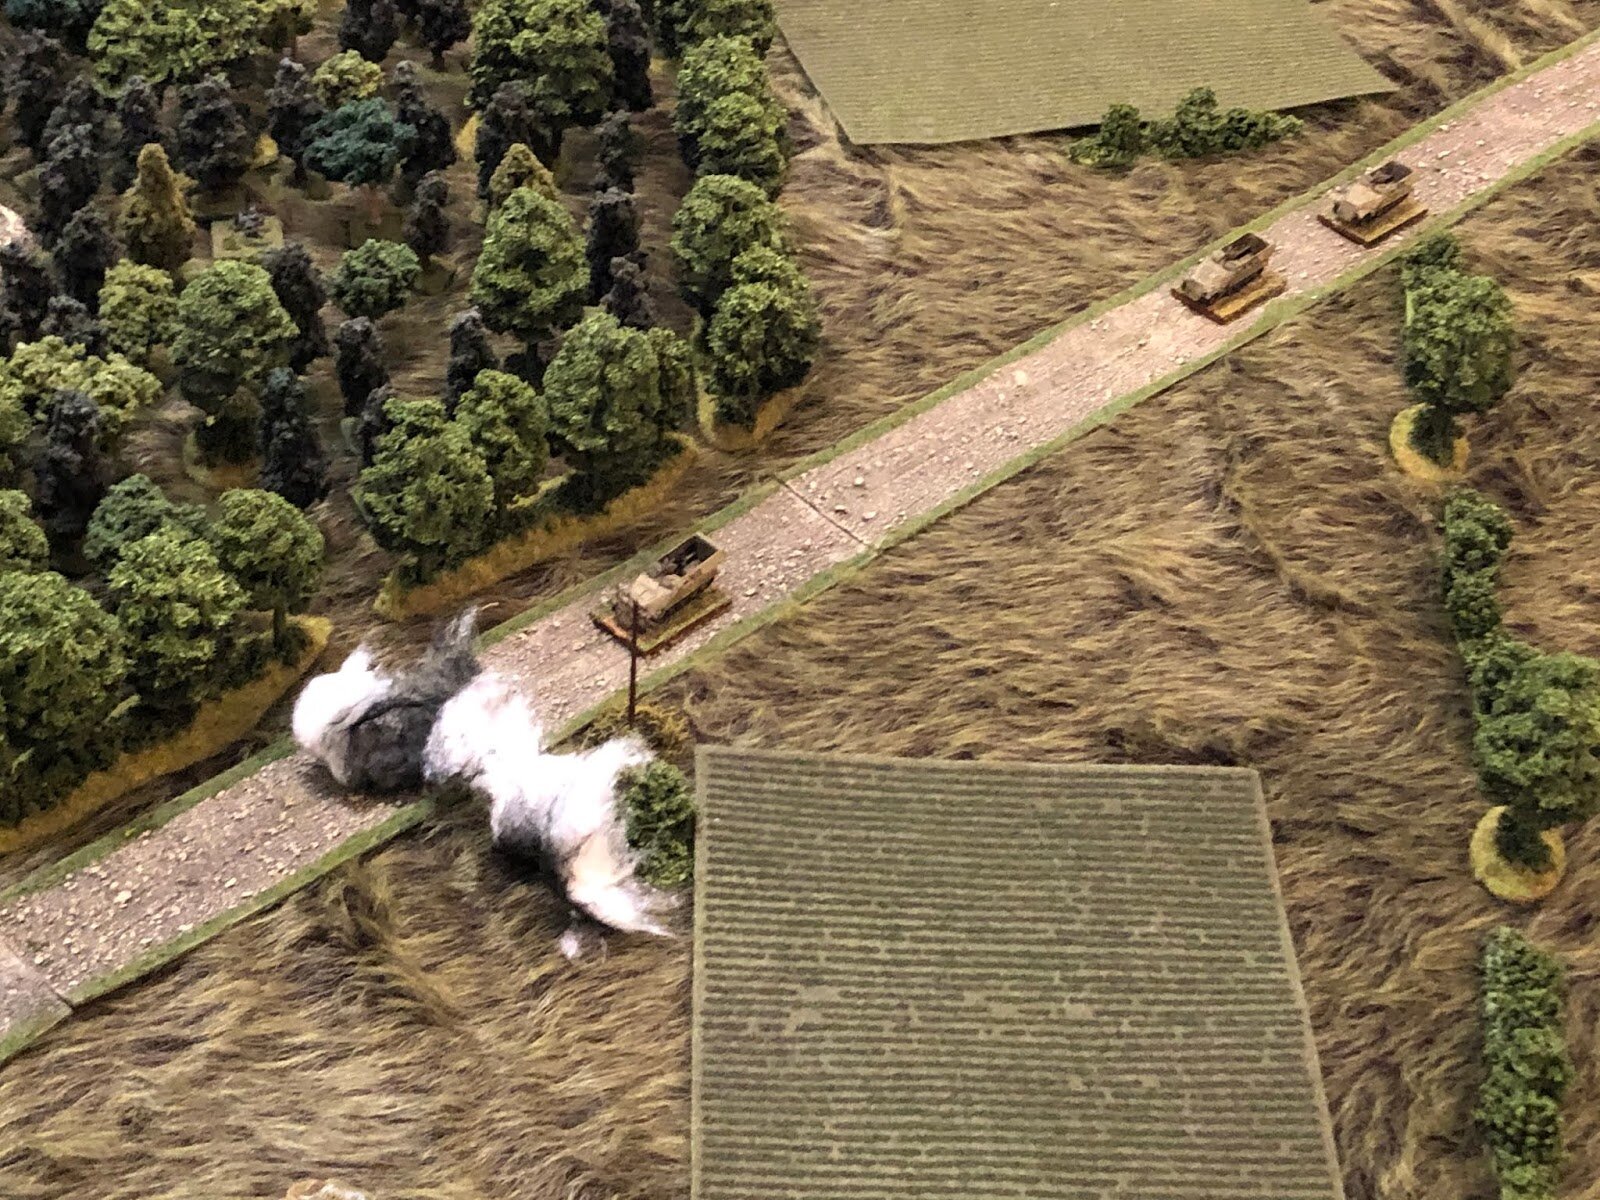  Dropping smoke on the road in order to obscure them from the German halftracks.  